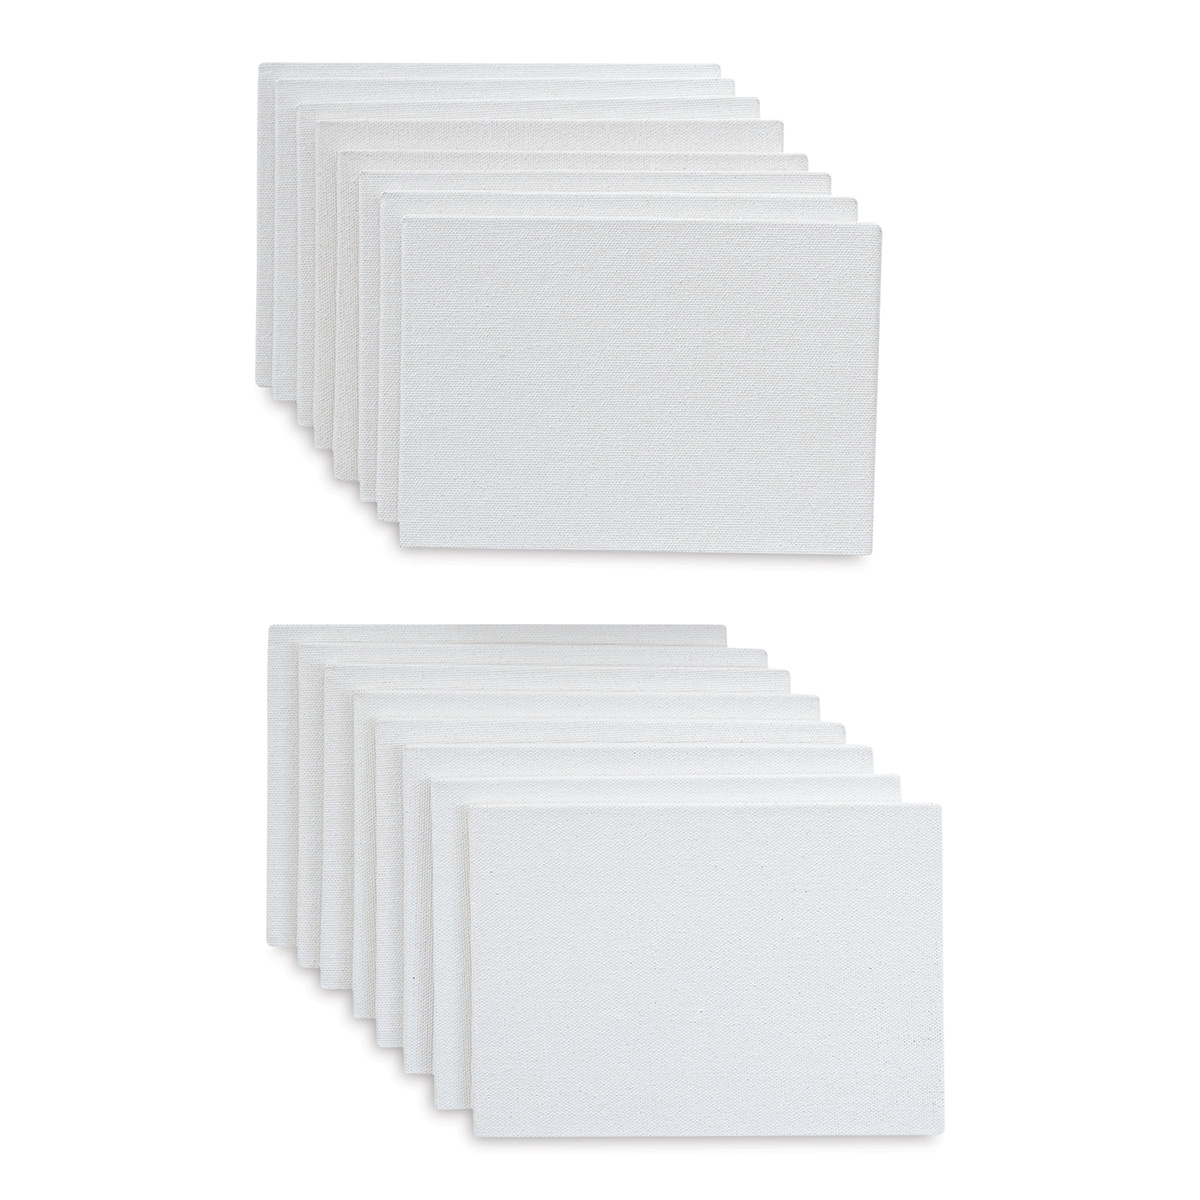 Strathmore 300 Series Cotton Canvas Panel Pack - 5 x 7, Package of 16